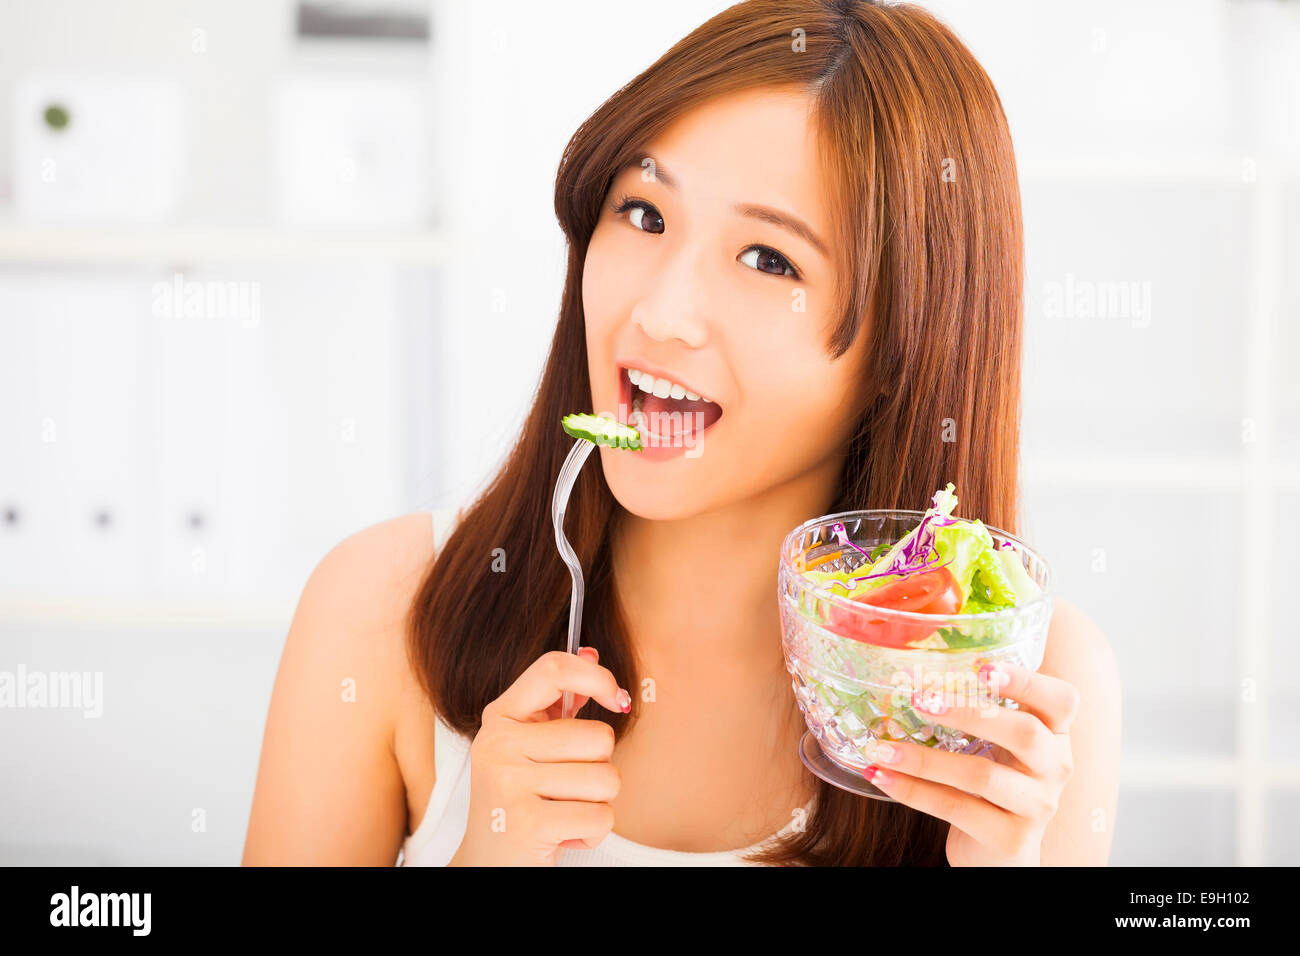 smiling young woman eating fruits and salad. healthy eating concept Stock Photo